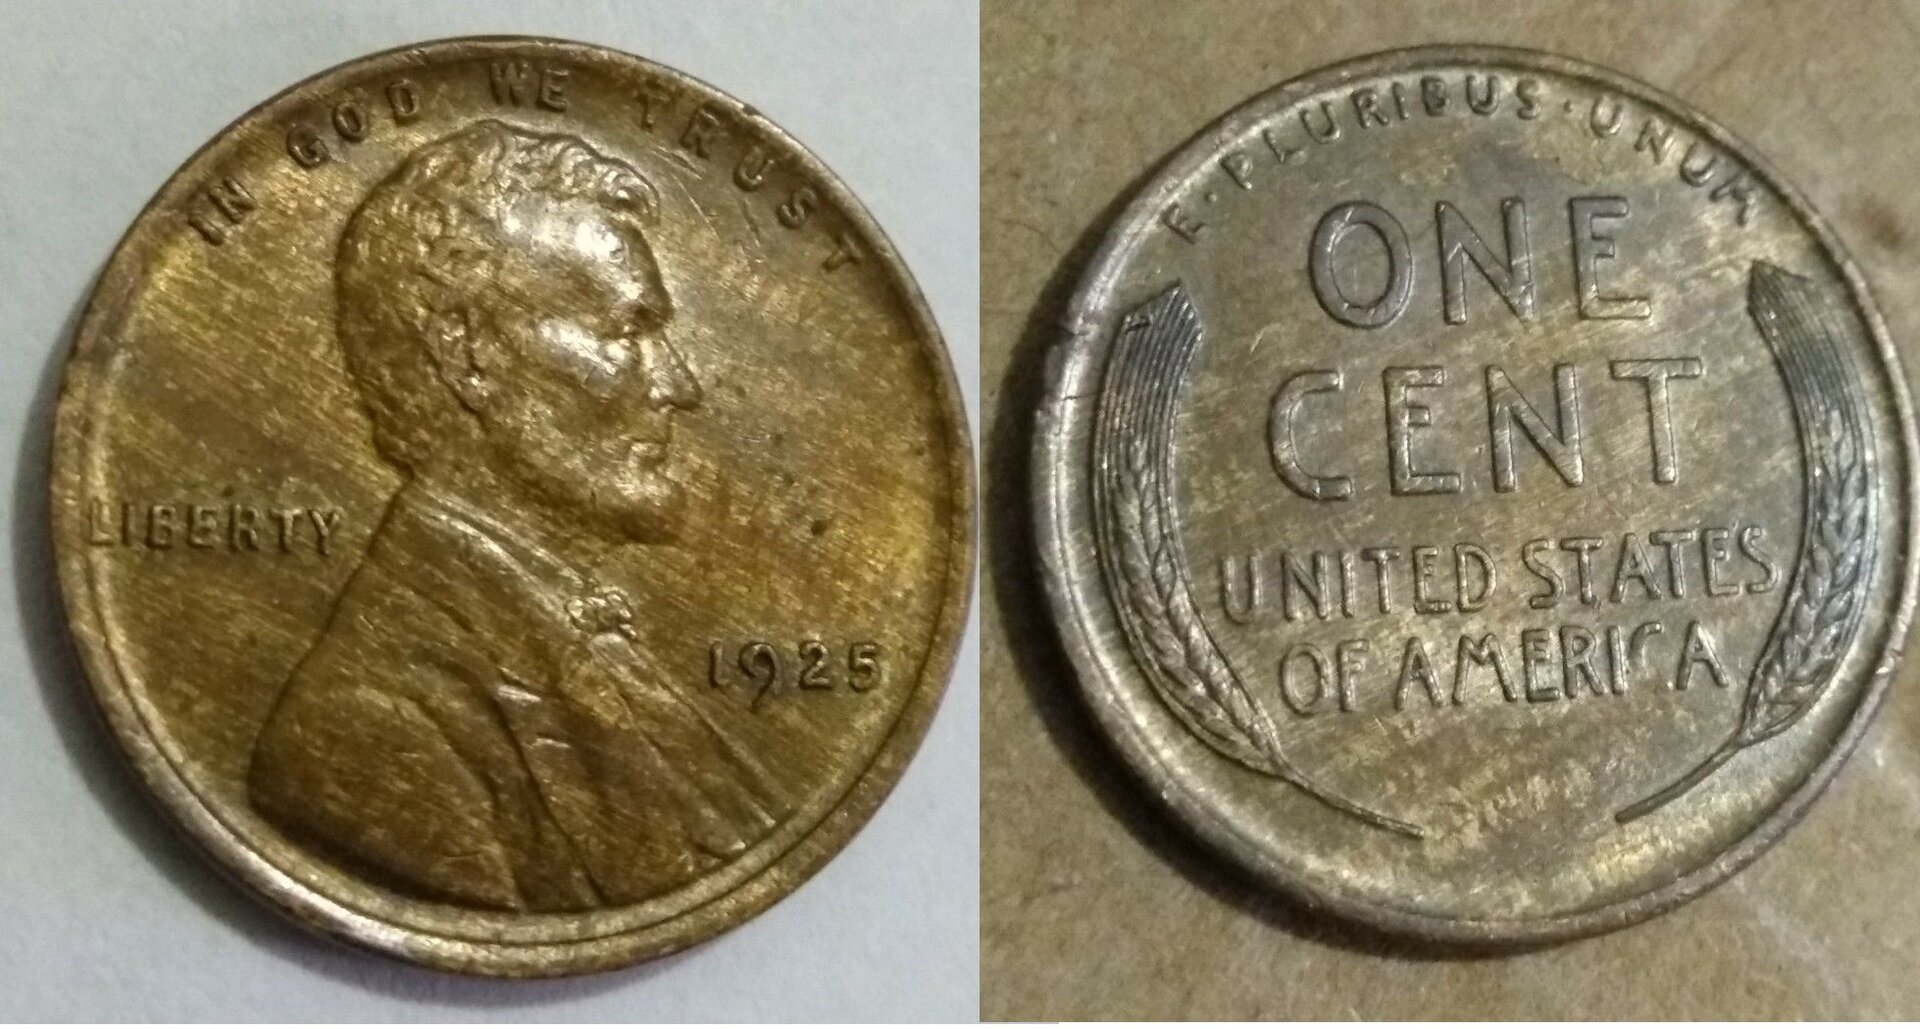 1925 Lincoln Cent wood color.jpg